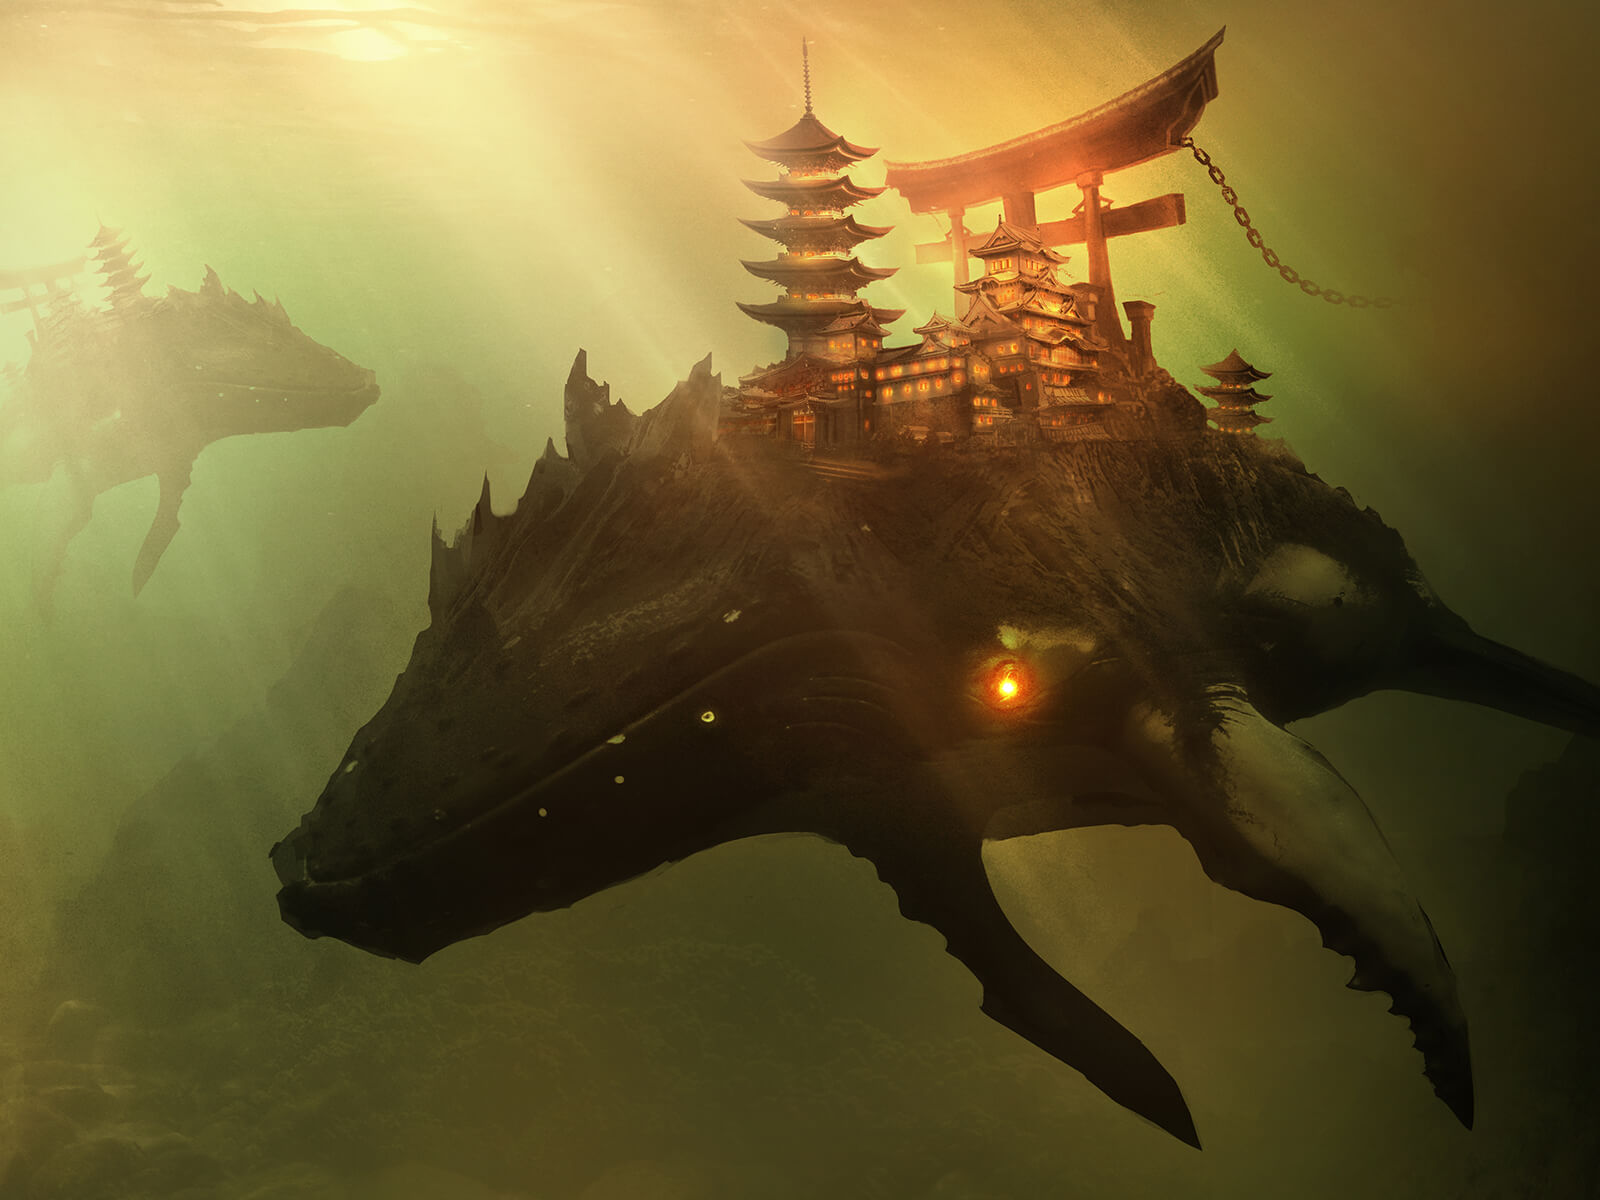 Whales swim through murky, rocky water, carrying pagoda-style castles and torii gates on their back.